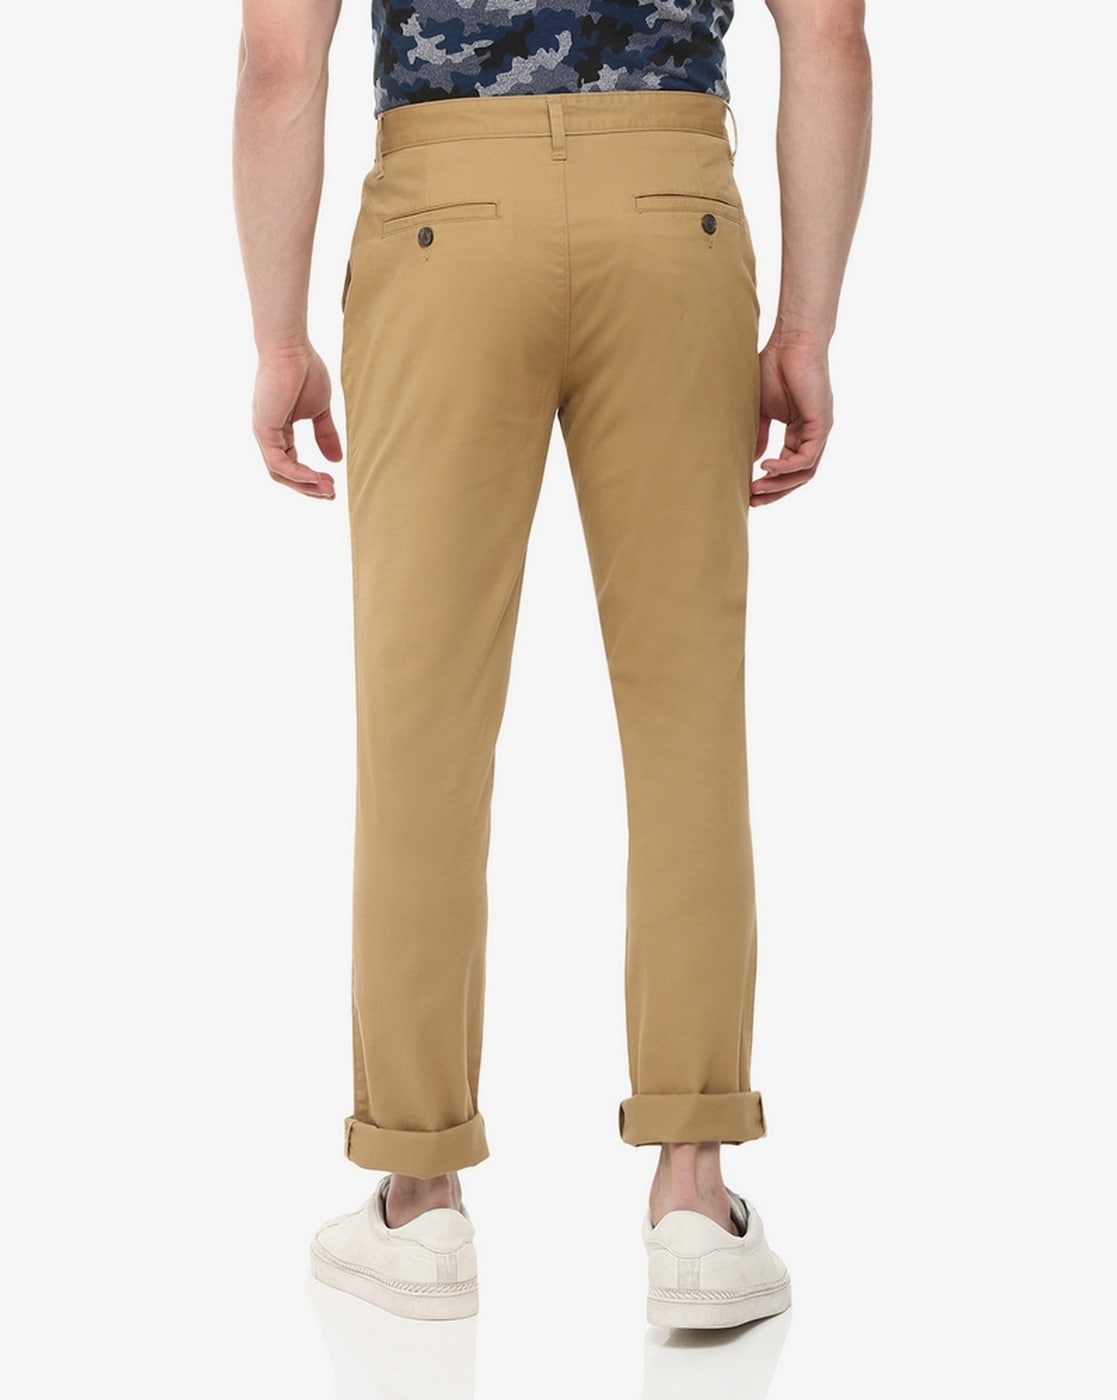 Buy CELIO Camel Mens Slim Fit Solid Trousers  Shoppers Stop